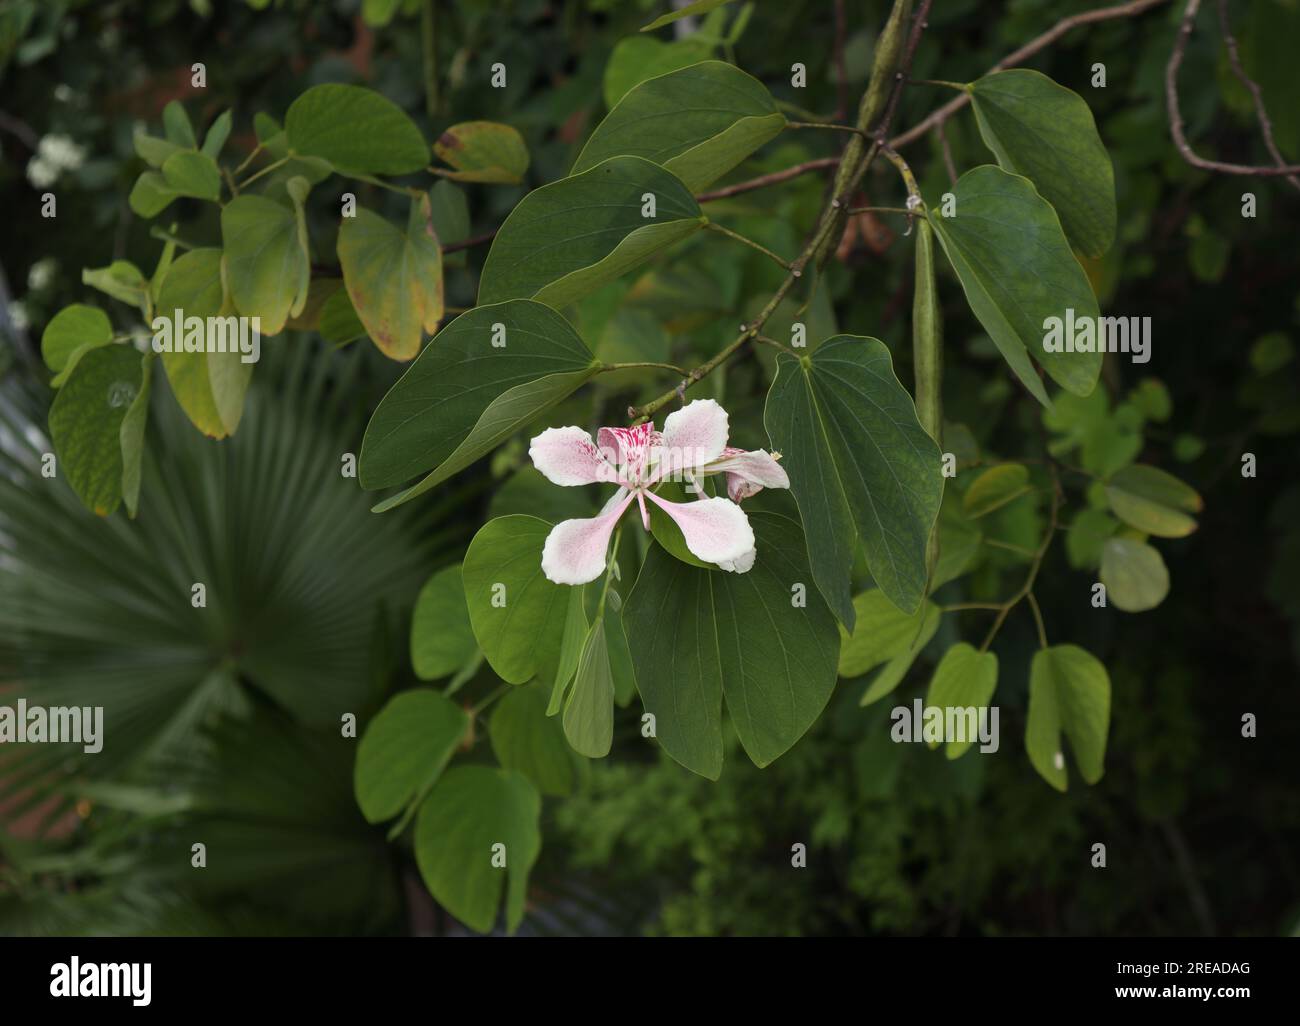 High angle view of a pink Bauhinia plant twig (Bauhinia Monandra) with a light pinkish flower Stock Photo